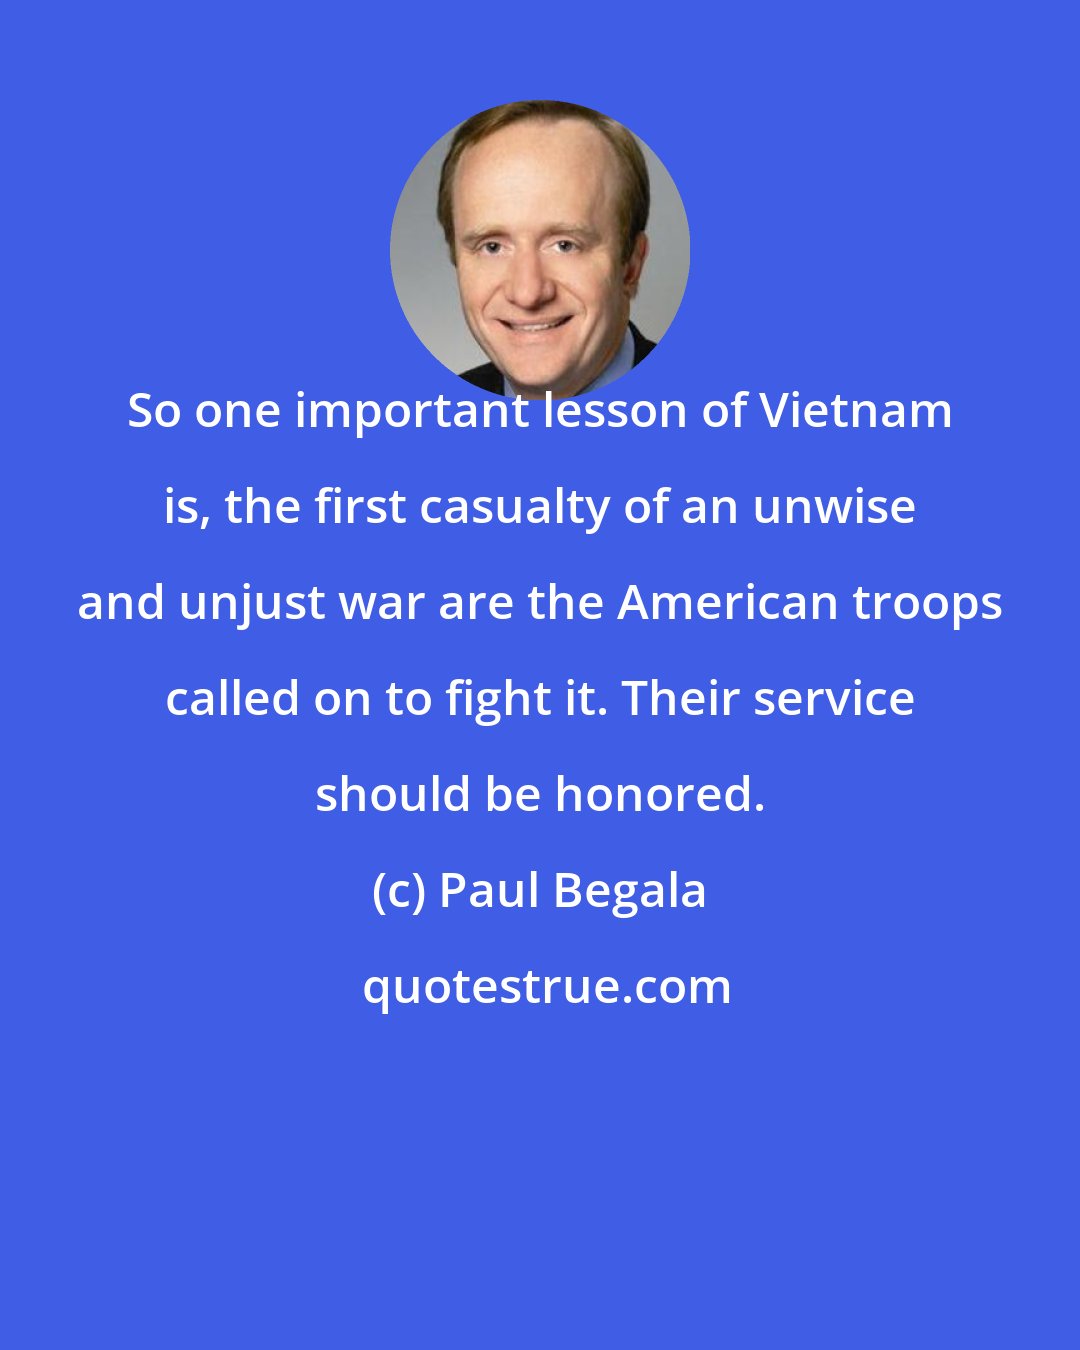 Paul Begala: So one important lesson of Vietnam is, the first casualty of an unwise and unjust war are the American troops called on to fight it. Their service should be honored.